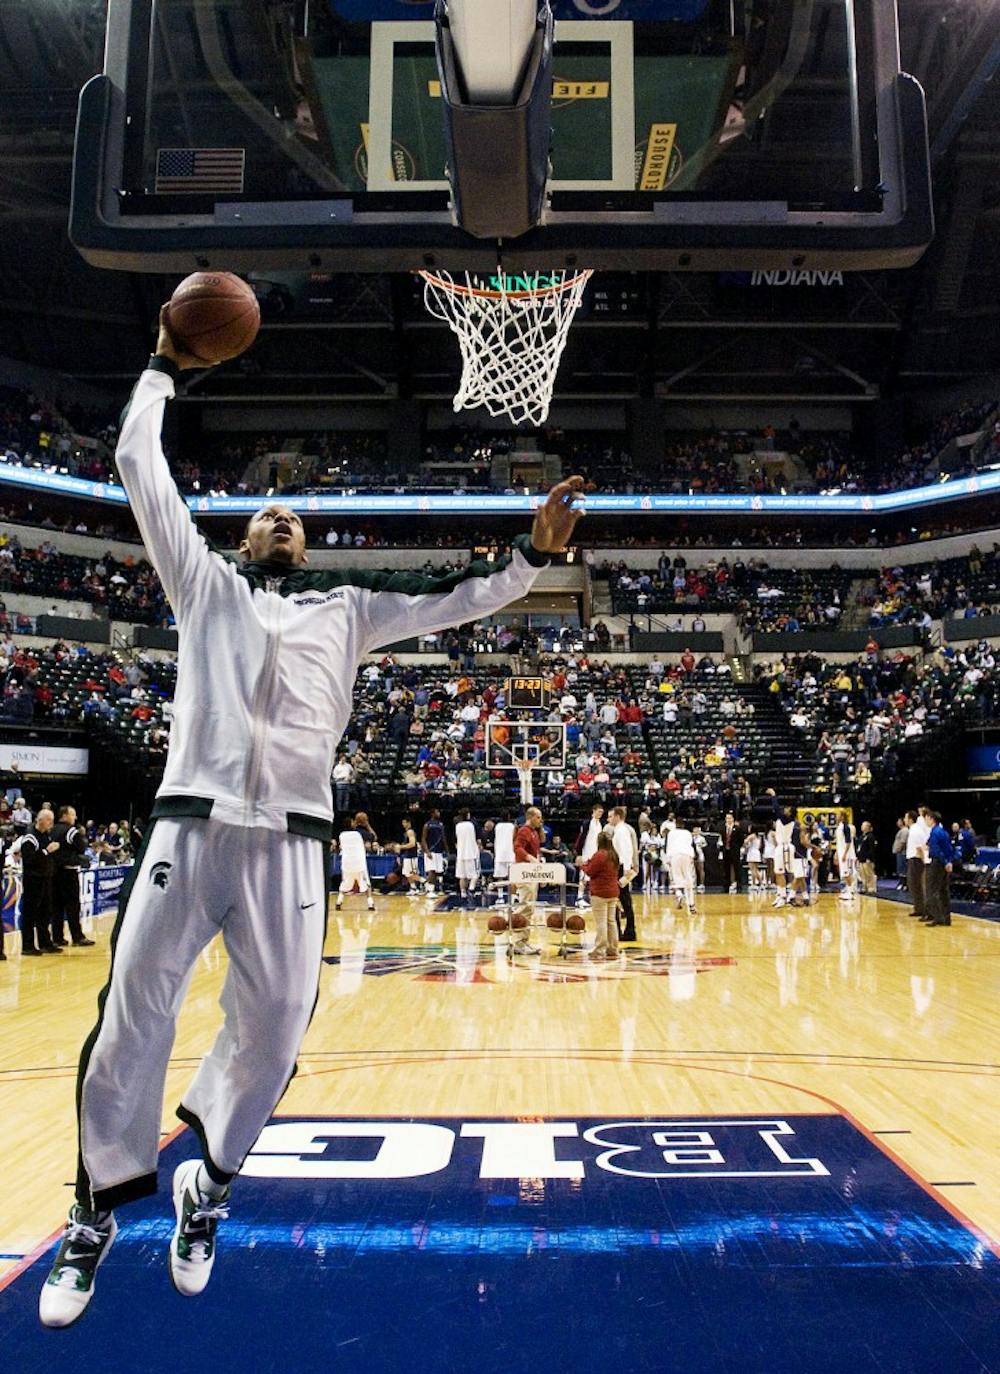 Freshman center Adreian Payne warms up before the game Saturday at Conseco Fieldhouse in Indianapolis, Ind. The Spartans lost to the Nittany Lions 61-48. Matt Radick/The State News